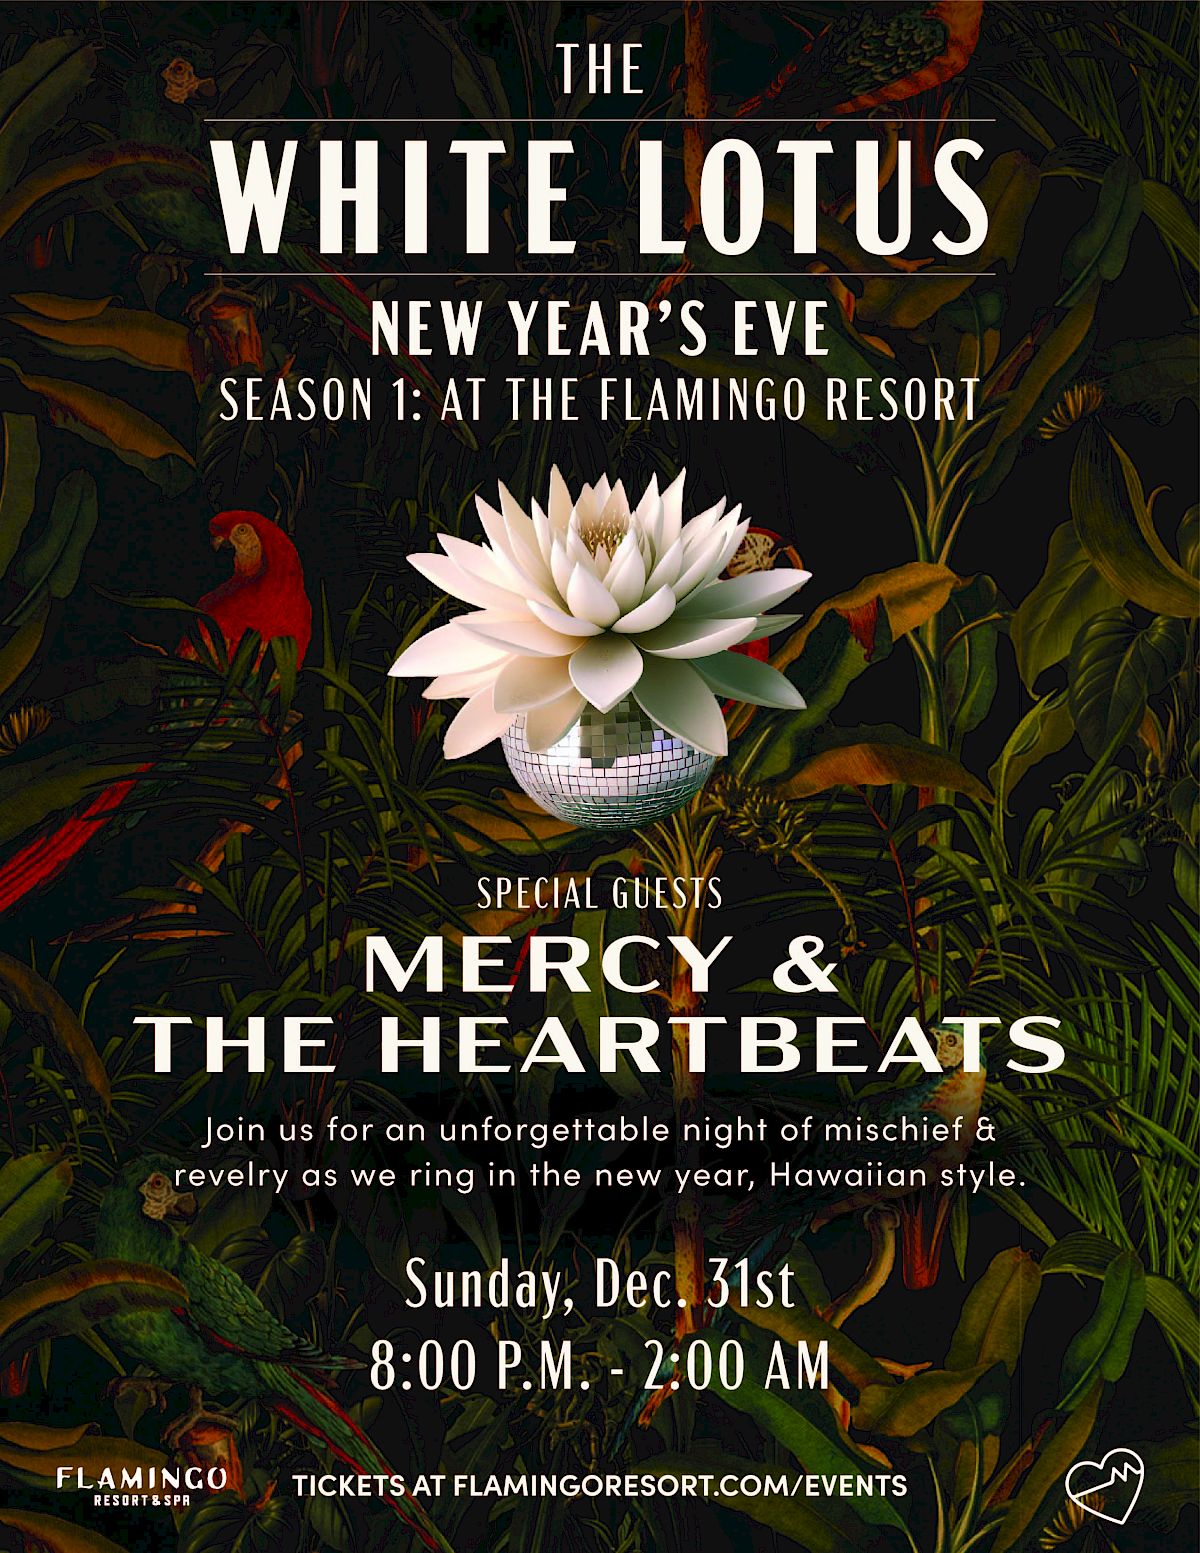 The White Lotus' New Year's Eve